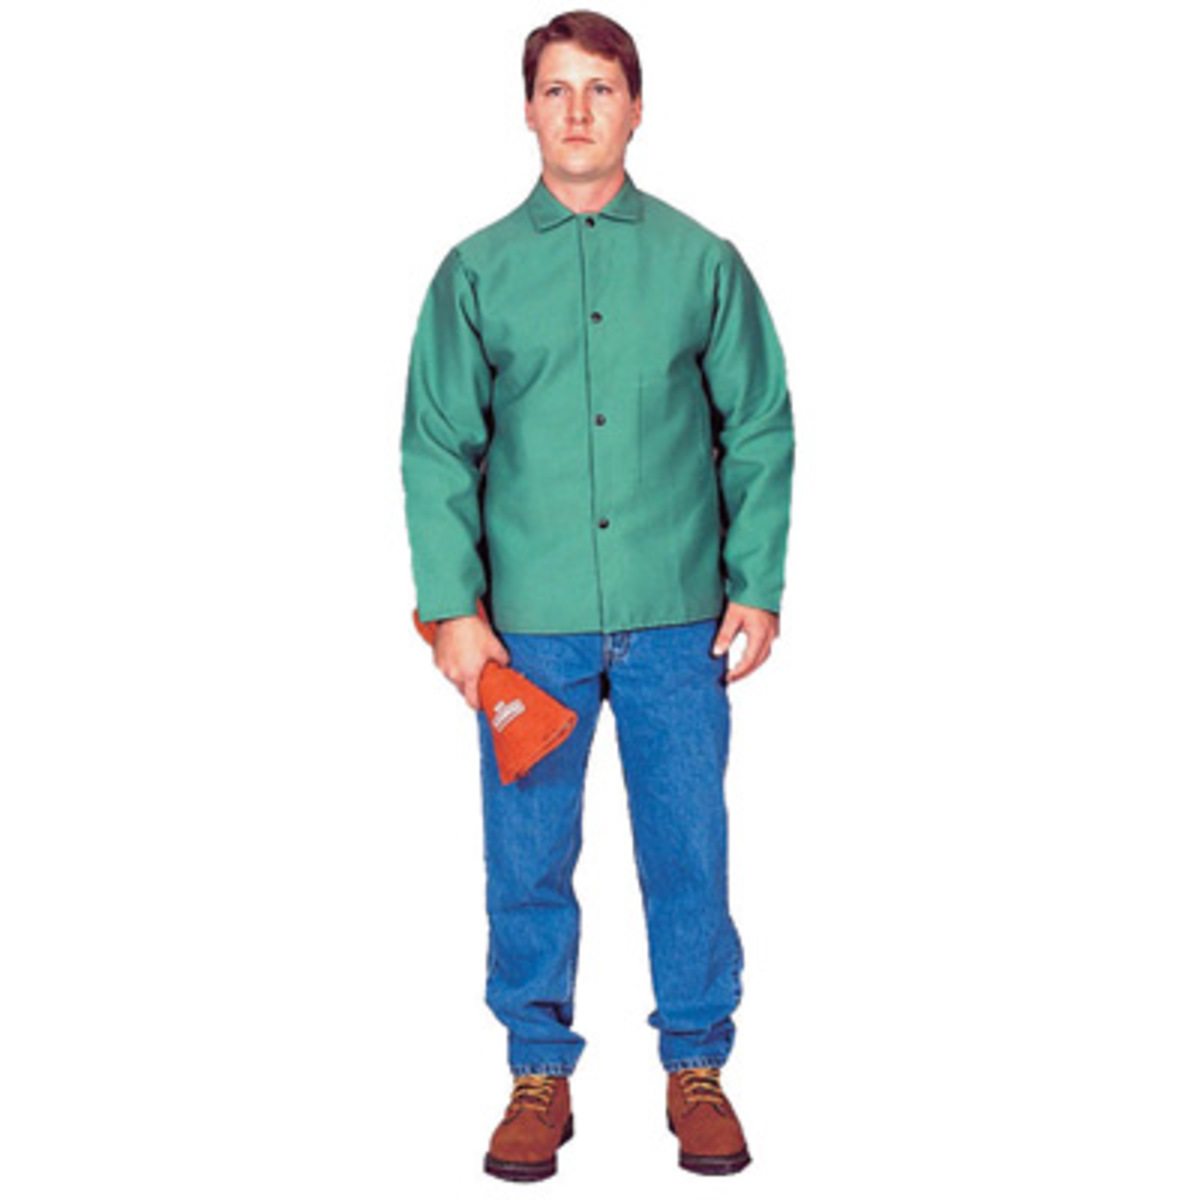 Stanco Safety Products™ Size 2X Green Cotton Leather Sleeves Flame Resistant Welding Jacket With Snap Closure